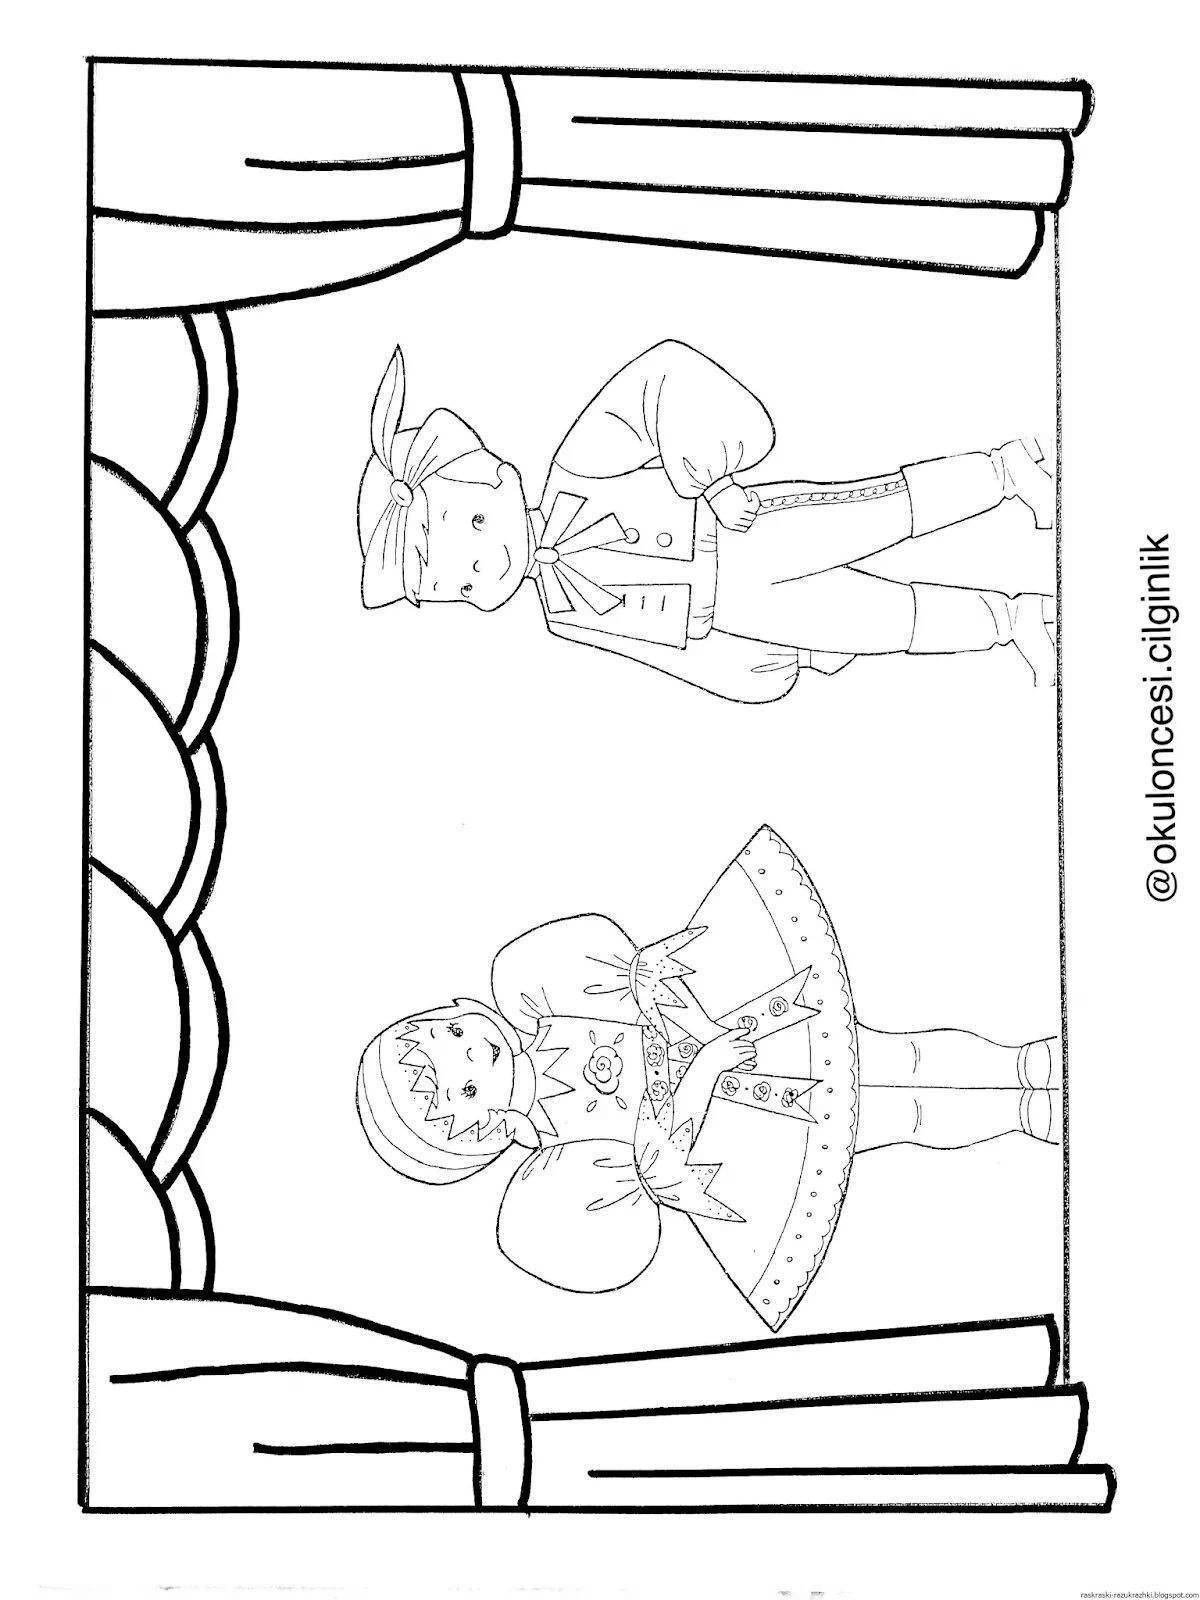 Coloring page stylish theater